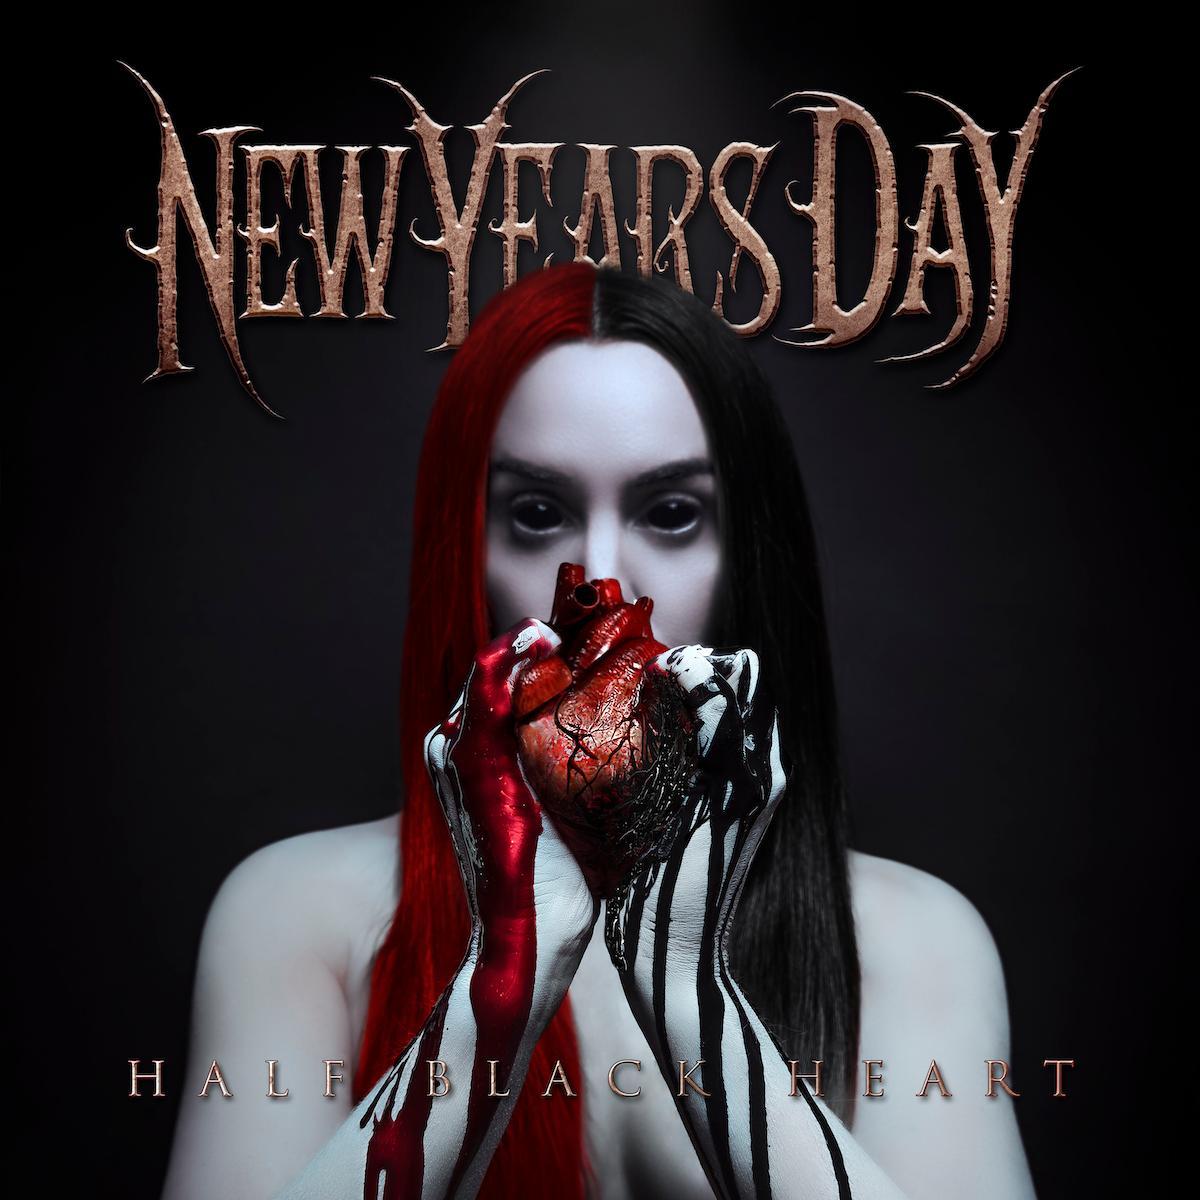 NEW YEARS DAY